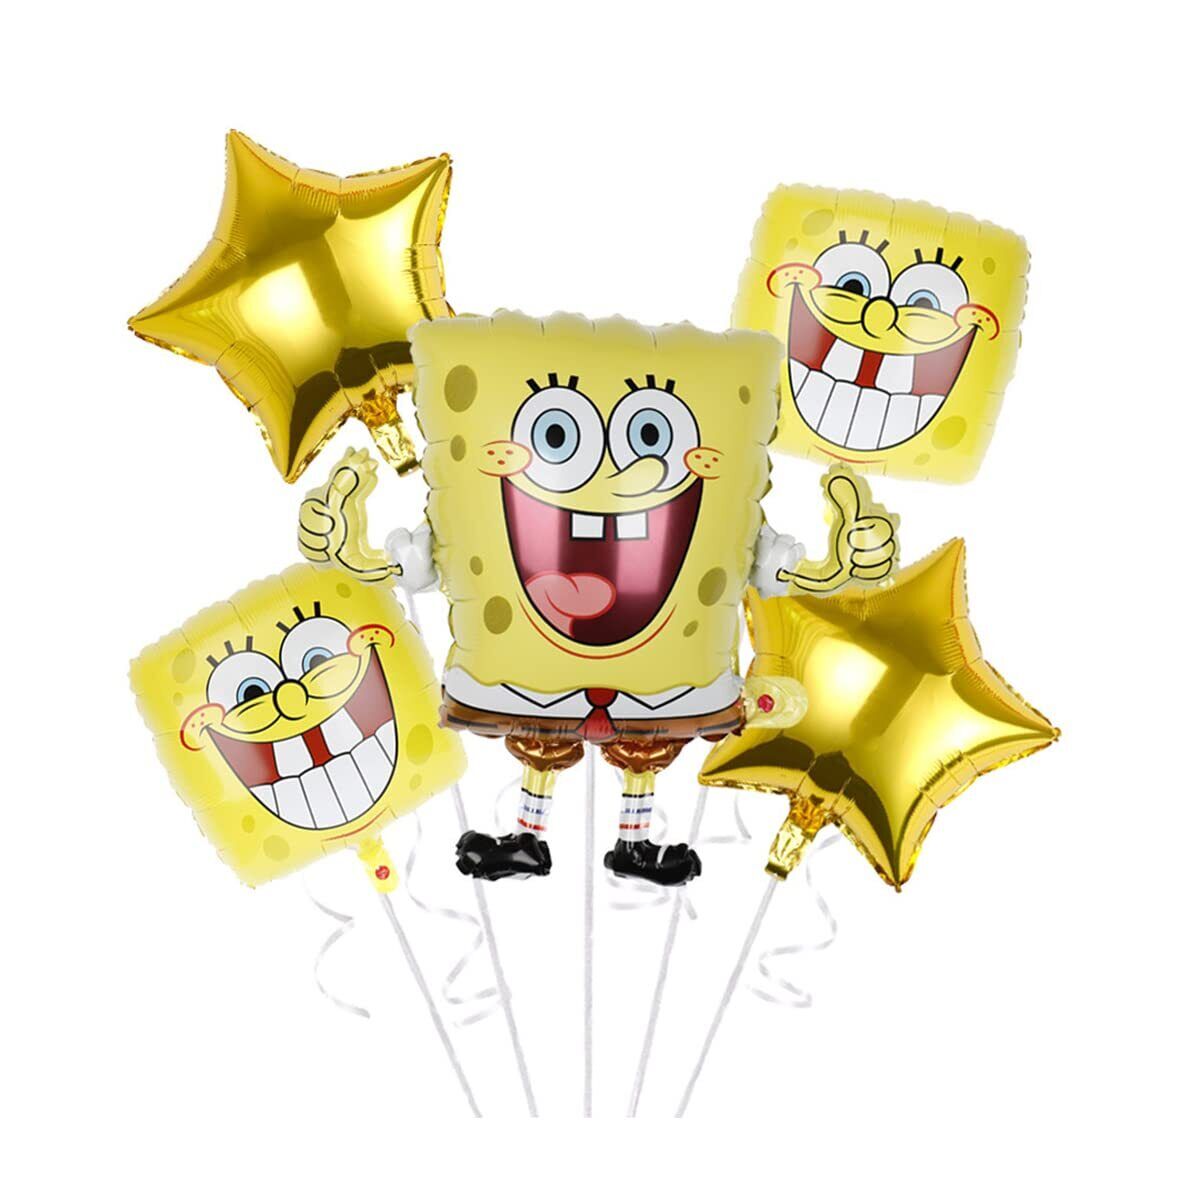 Balloon Sponge Baby Birthday Party Set Cute Stylish Character Party Balloon Chil